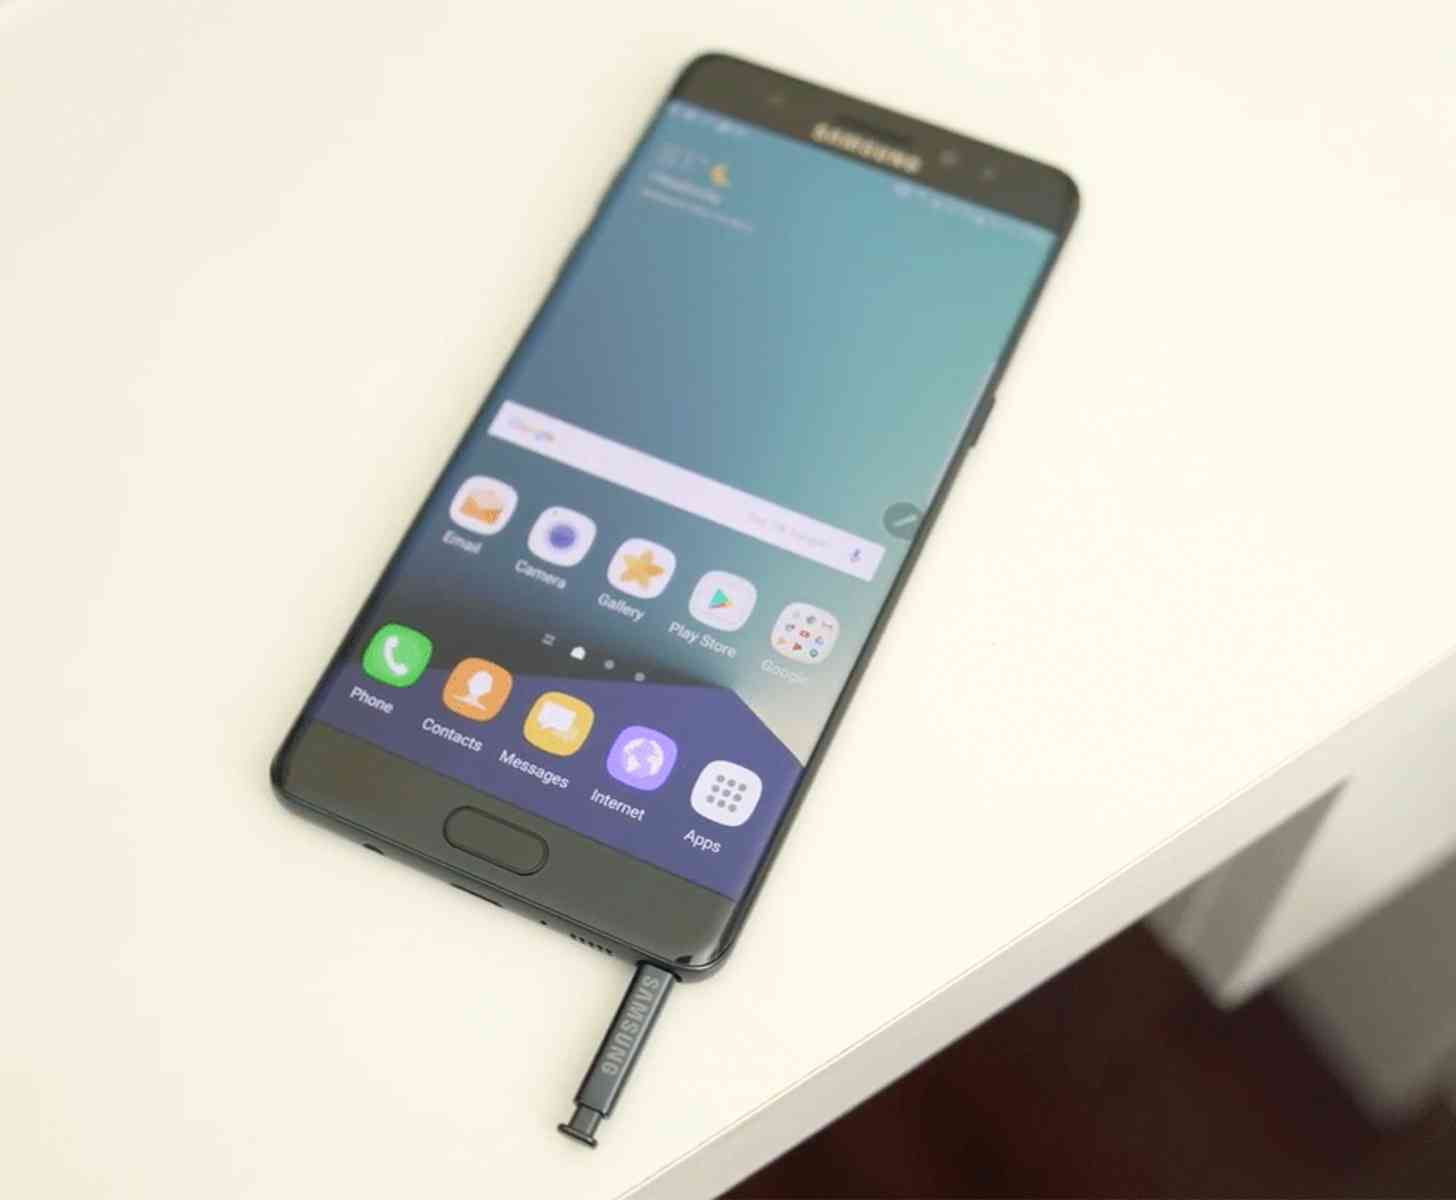 Samsung Galaxy Note 7 S Pen hands-on